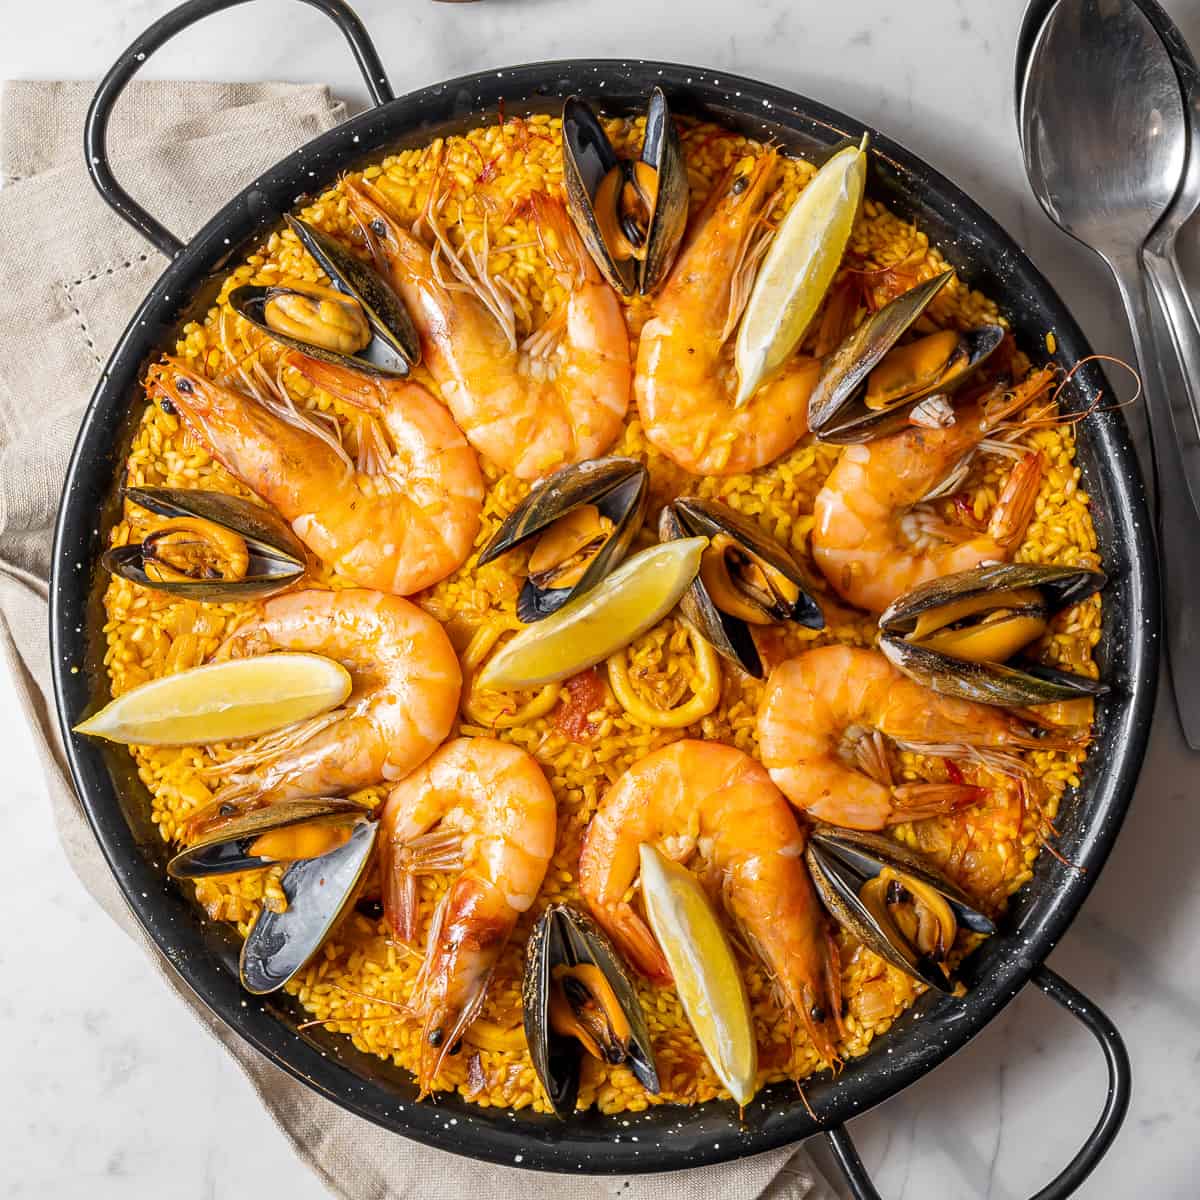 https://spanishsabores.com/wp-content/uploads/2023/08/Seafood-Paella-Featured.jpg